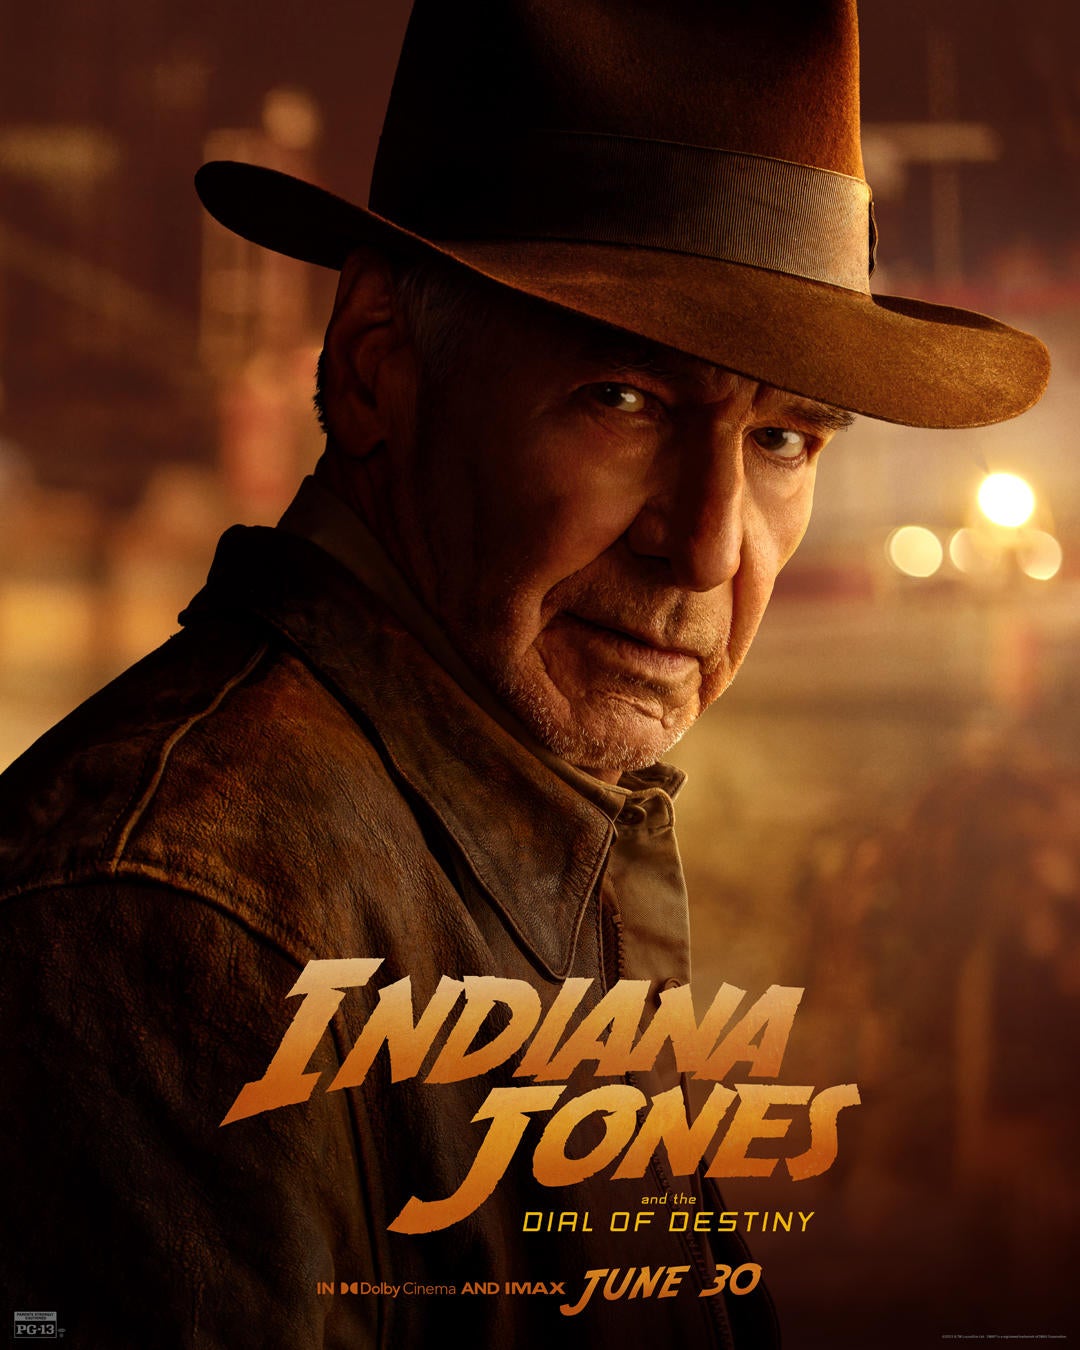 Indiana Jones and the Dial of Destiny Whips up 7 New Character Posters